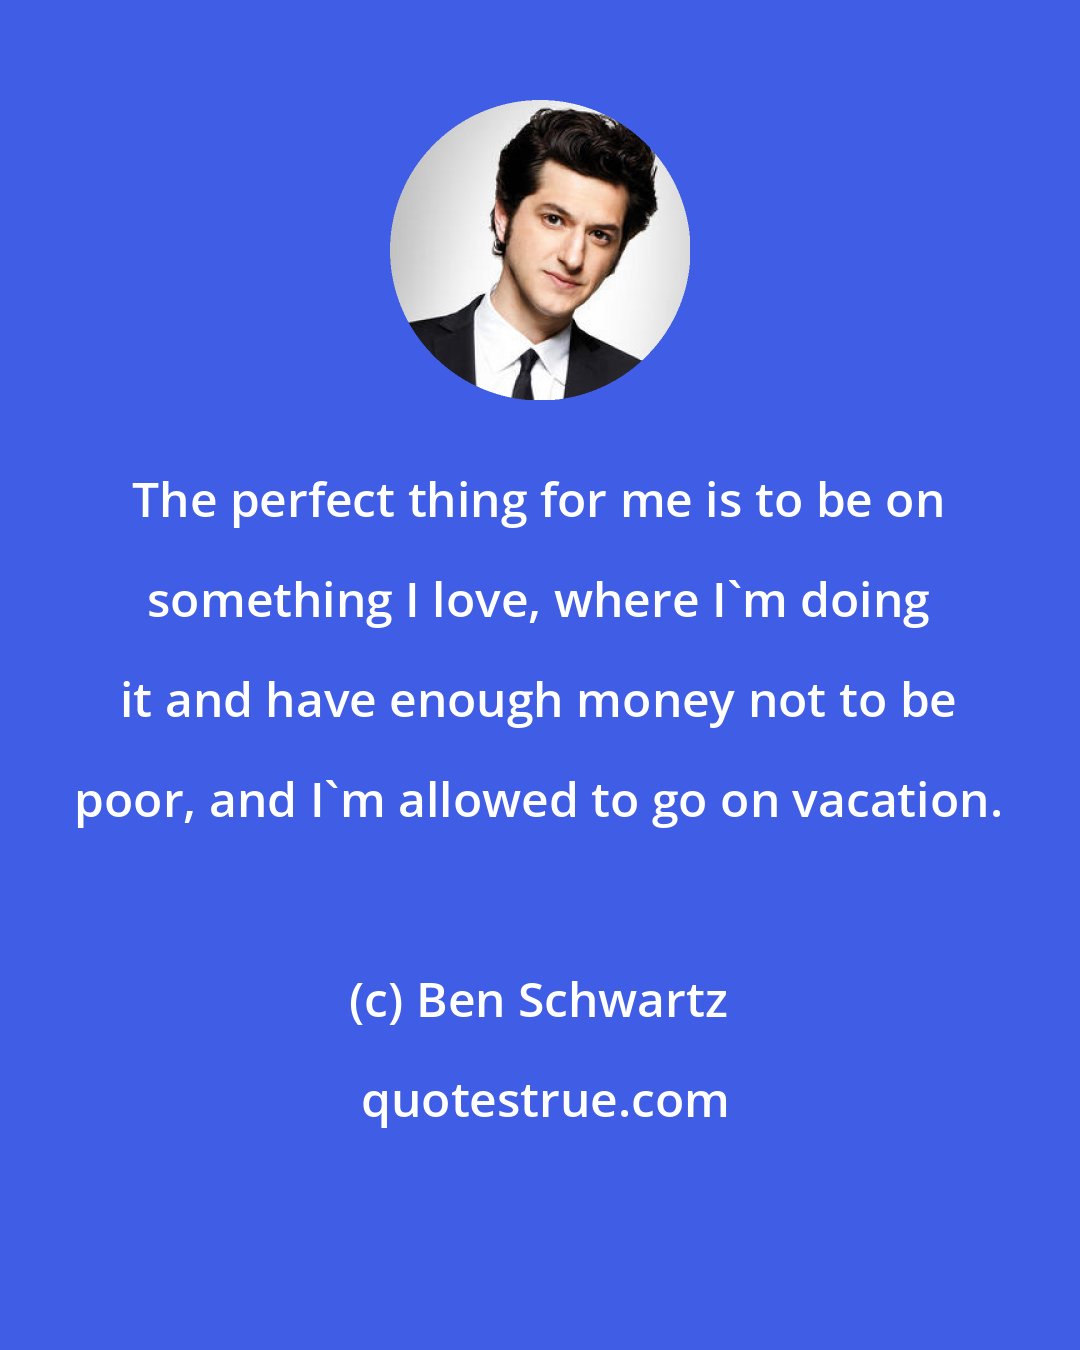 Ben Schwartz: The perfect thing for me is to be on something I love, where I'm doing it and have enough money not to be poor, and I'm allowed to go on vacation.